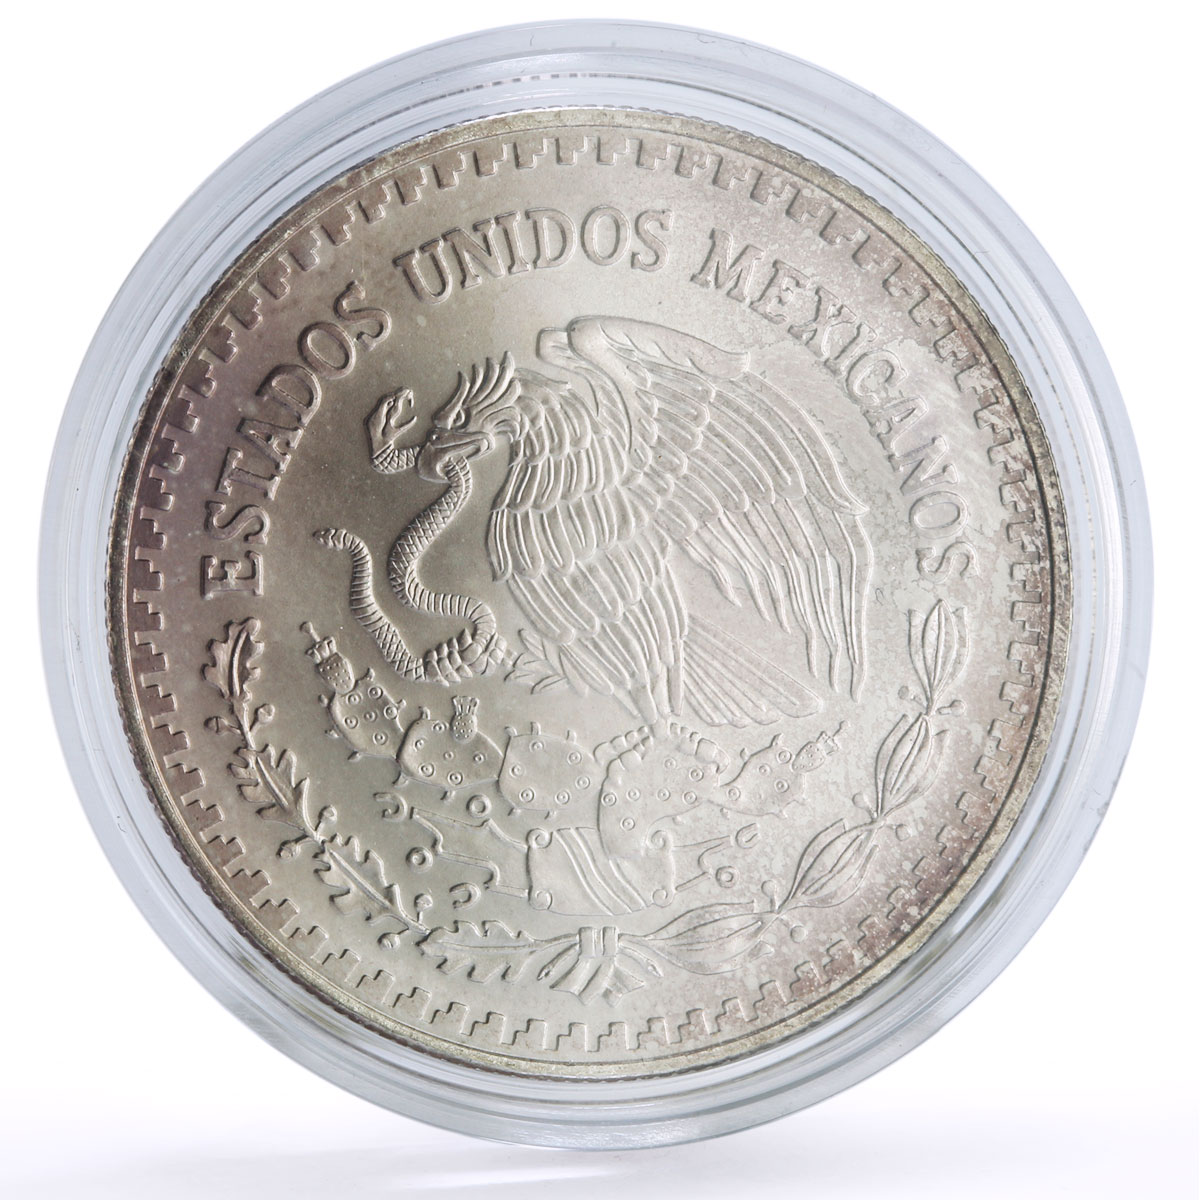 Mexico 1 onza Libertad Angel of Independence silver coin 1996